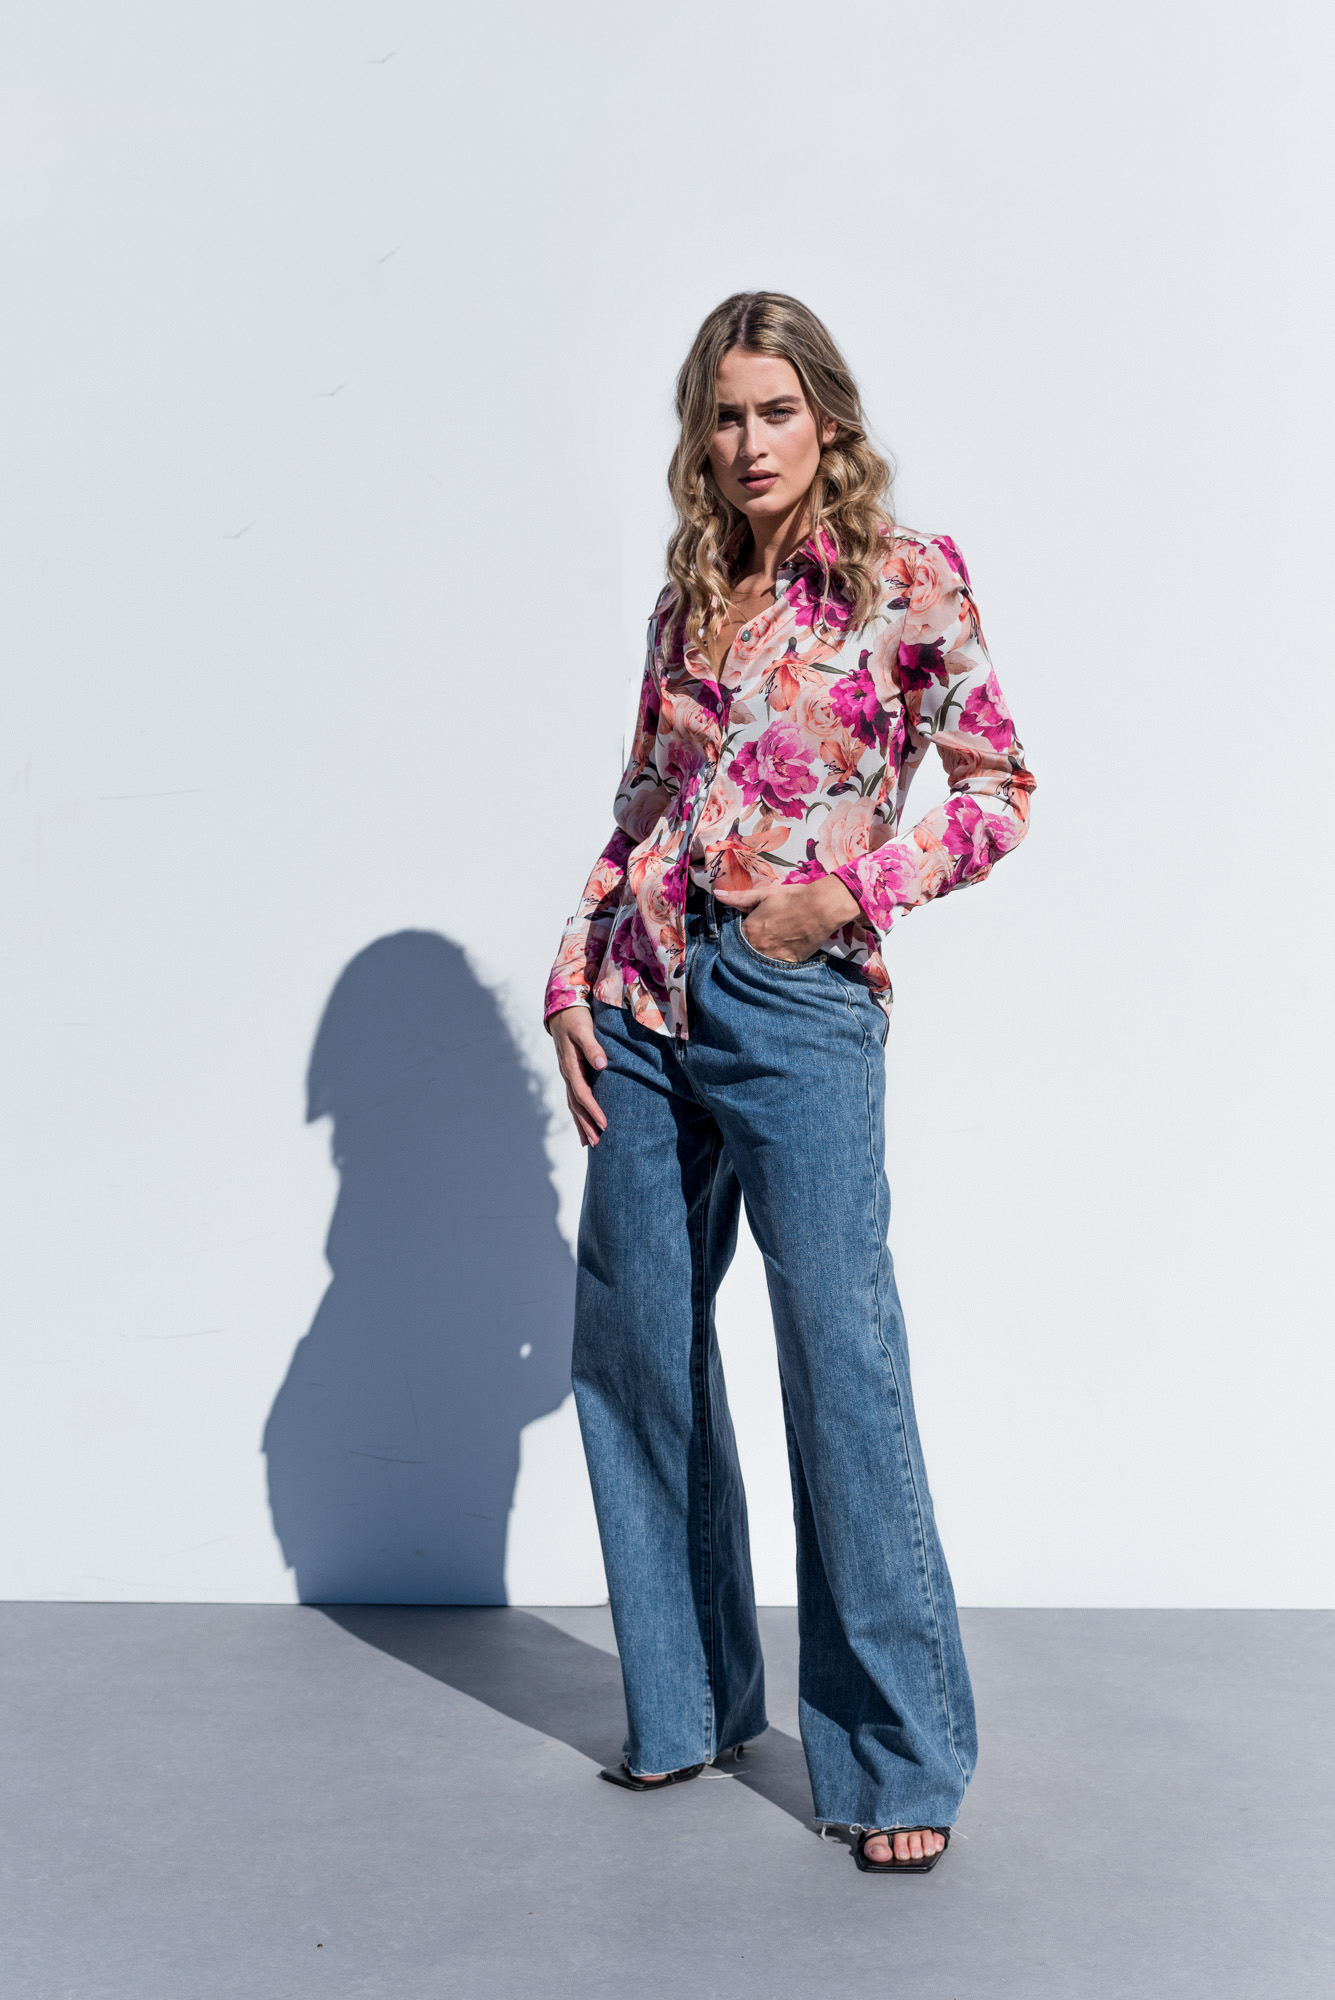 The French 95 - Swiss online shopping for women's fashion - Shop women's floral shirts at affordable prices - Free shipping in Switzerland